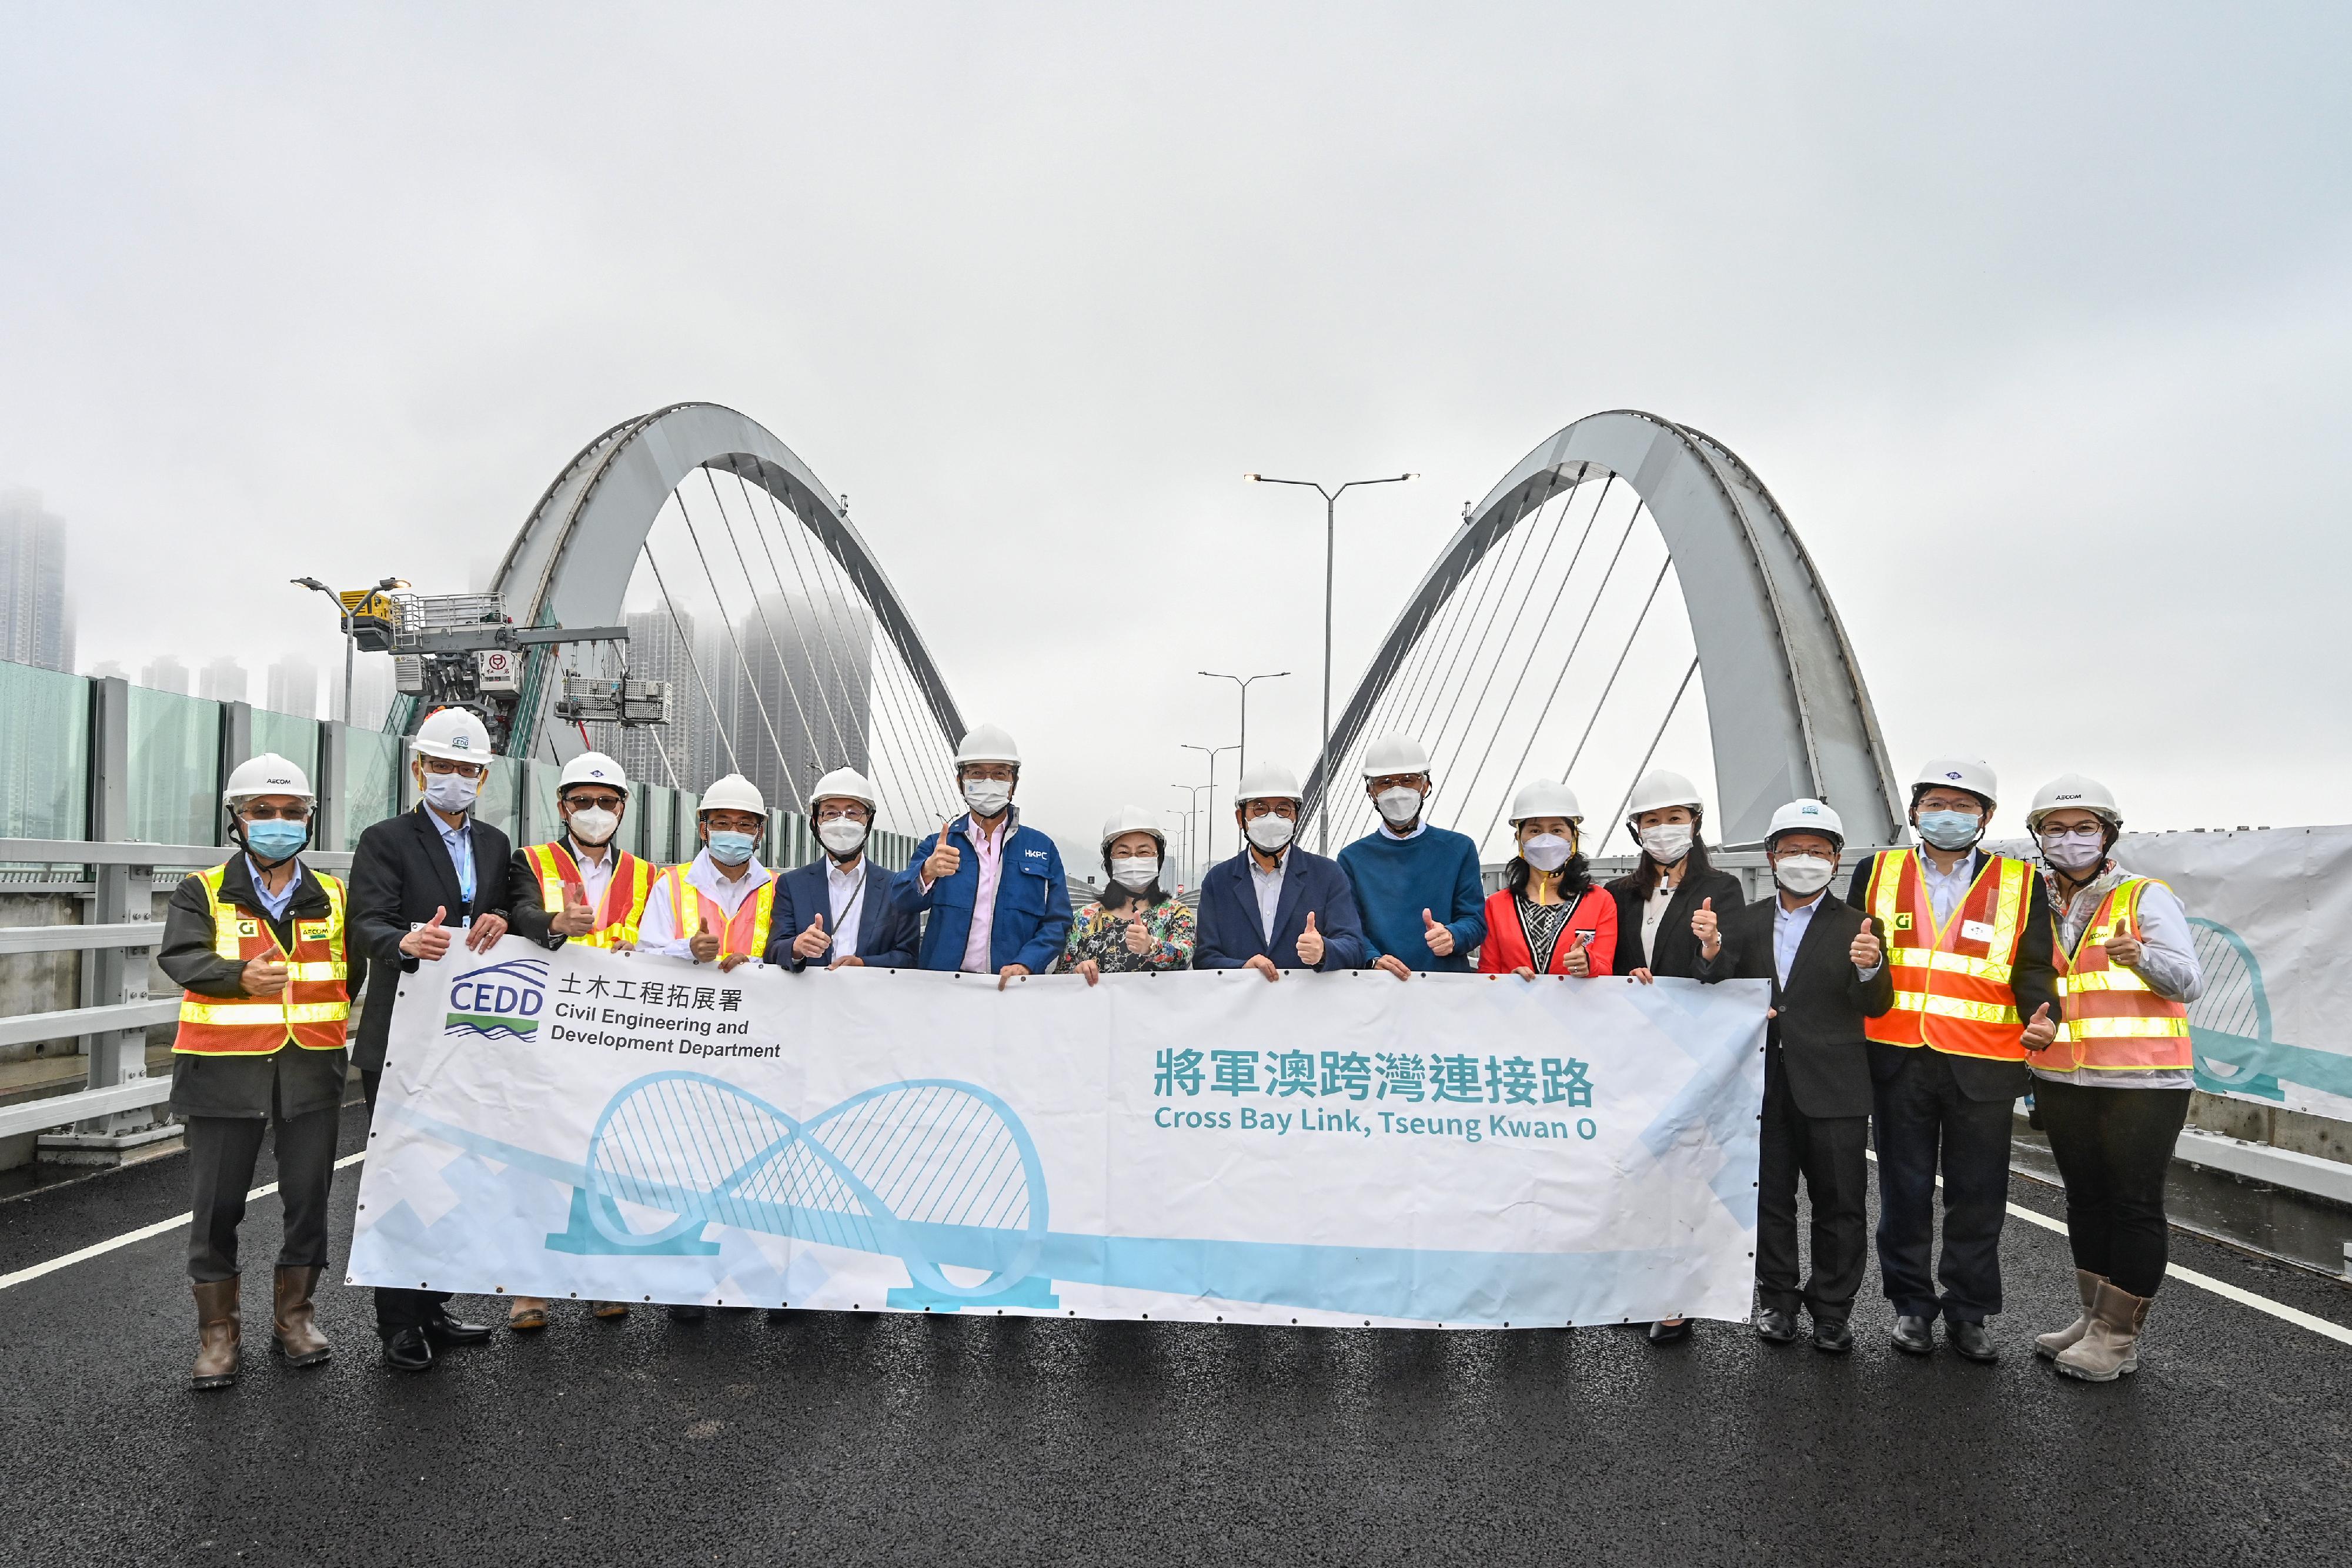 Non-official Members of the Executive Council (ExCo Non-official Members) today (November 25) visited the Tseung Kwan O-Lam Tin Tunnel and Cross Bay Link, Tseung Kwan O. Photo shows ExCo Non-official Members with the Secretary for Transport and Logistics, Mr Lam Sai-hung (fourth left); the Permanent Secretary for Transport and Logistics, Ms Mable Chan (fifth right); and representatives of the Government and the project team members on the marine viaduct of the Cross Bay Link, Tseung Kwan O.